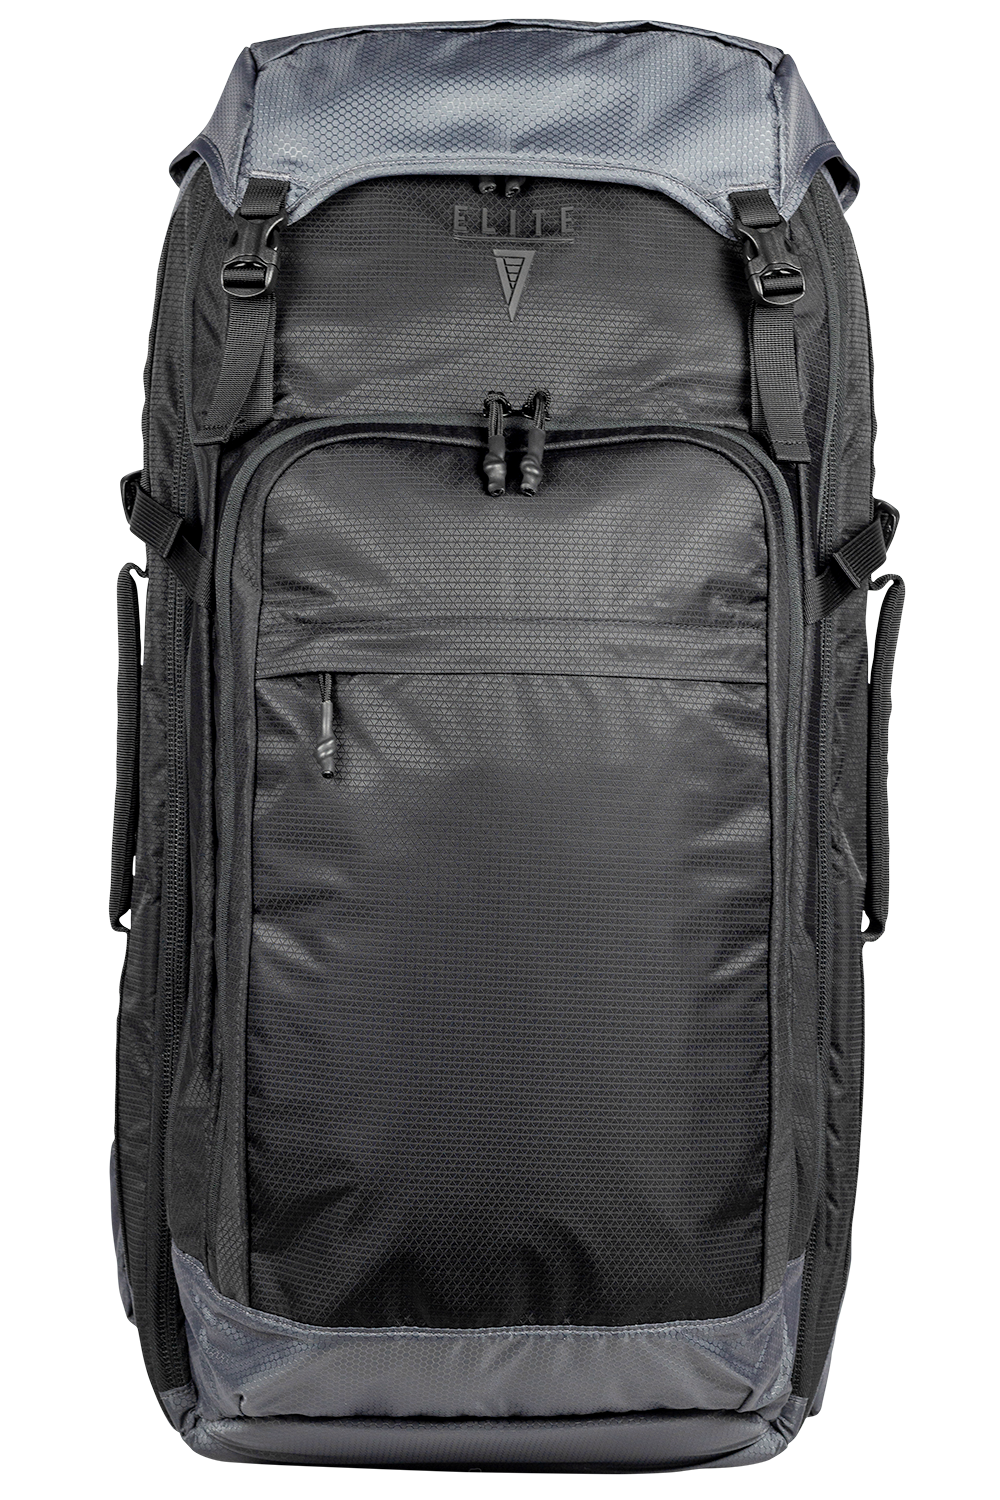 Elite Survival Systems Summit Discreet Rifle Backpack Review